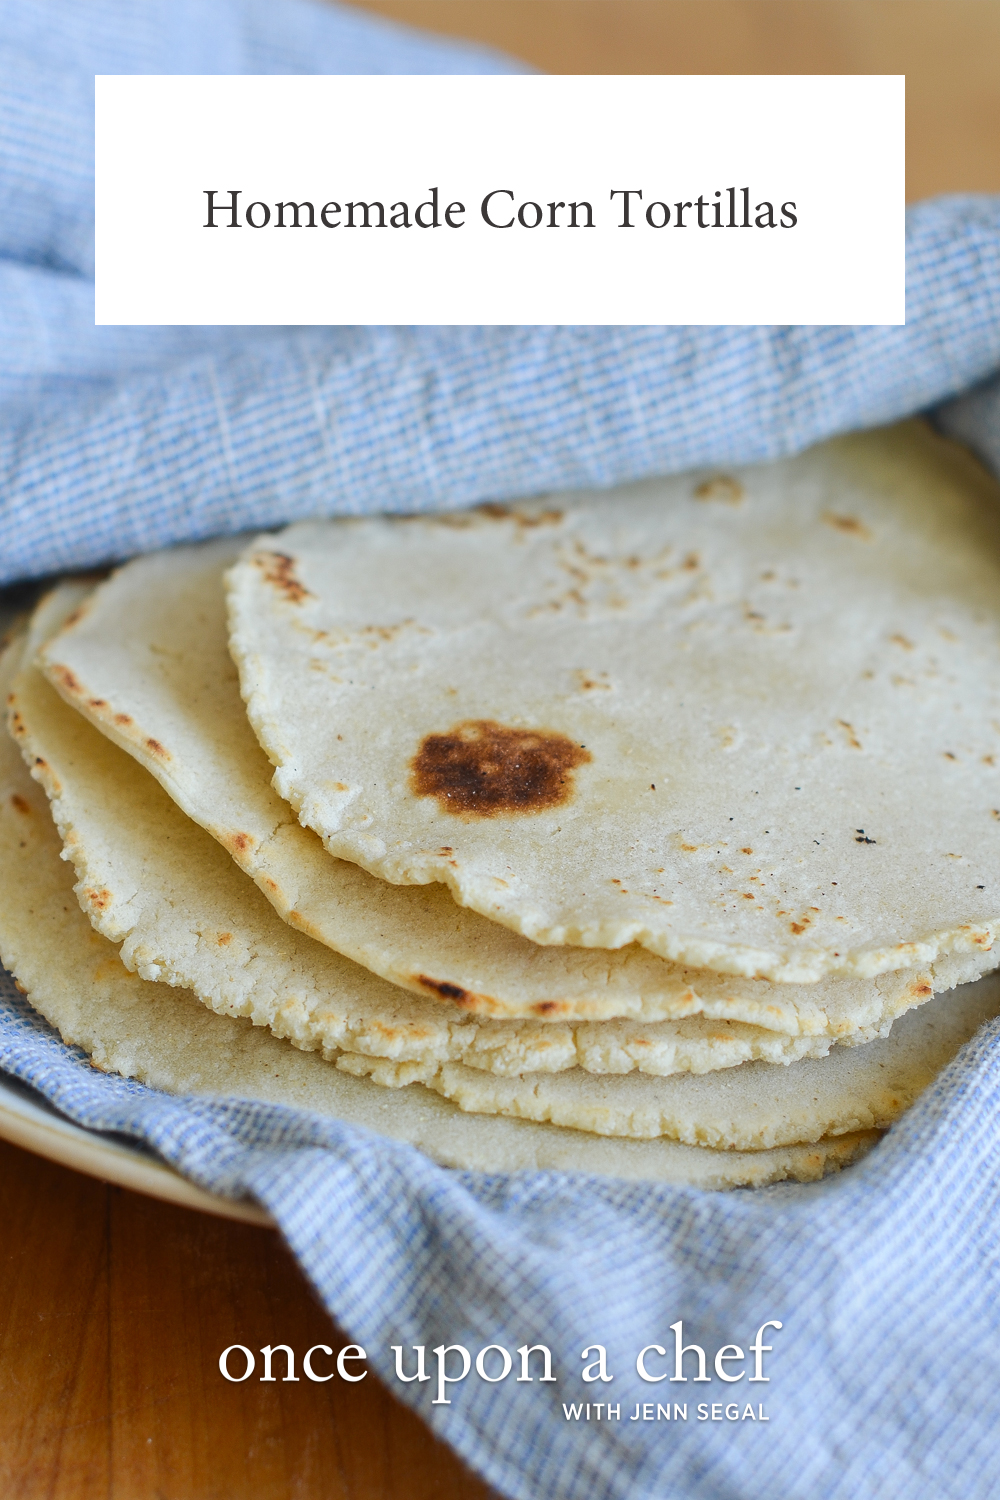 How To Make Corn Tortillas - Once Upon a Chef